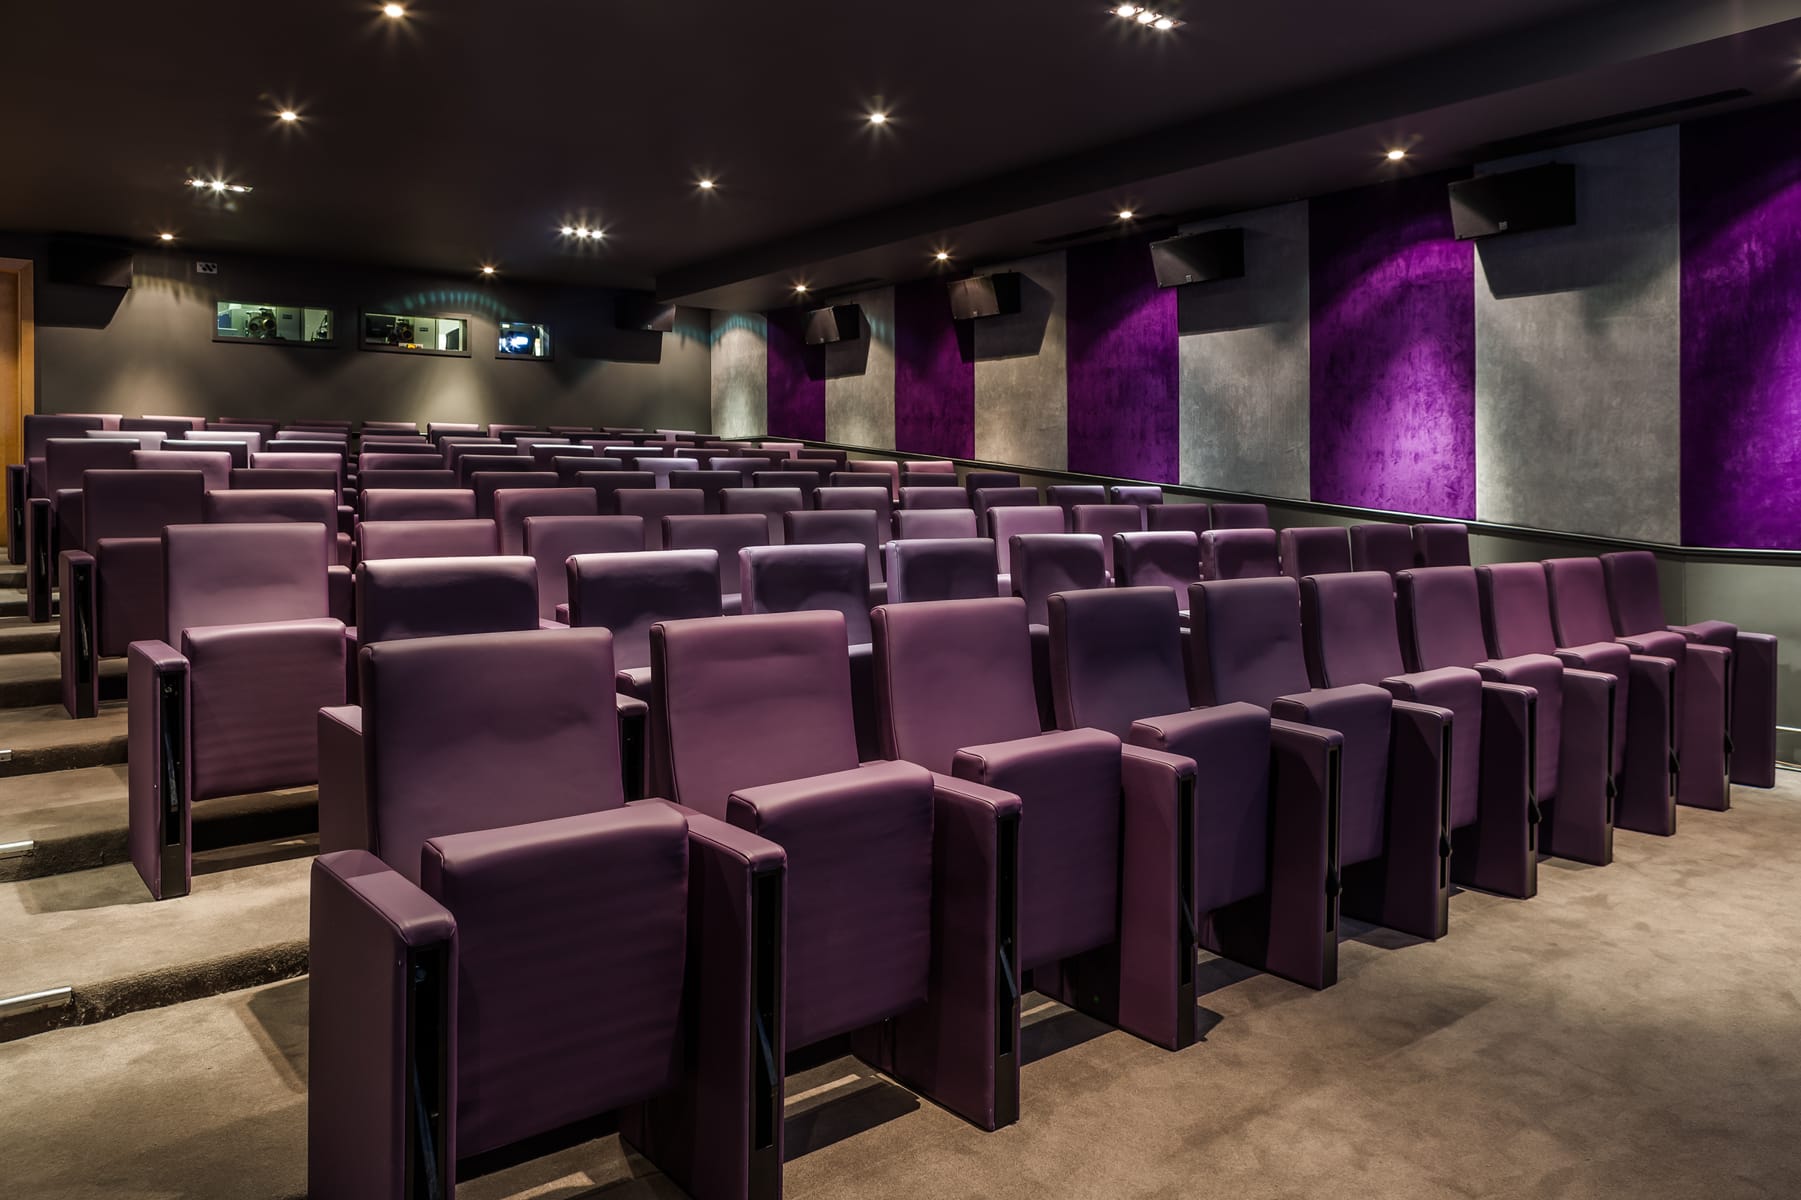 View of the back of the cinema room with purple chairs.